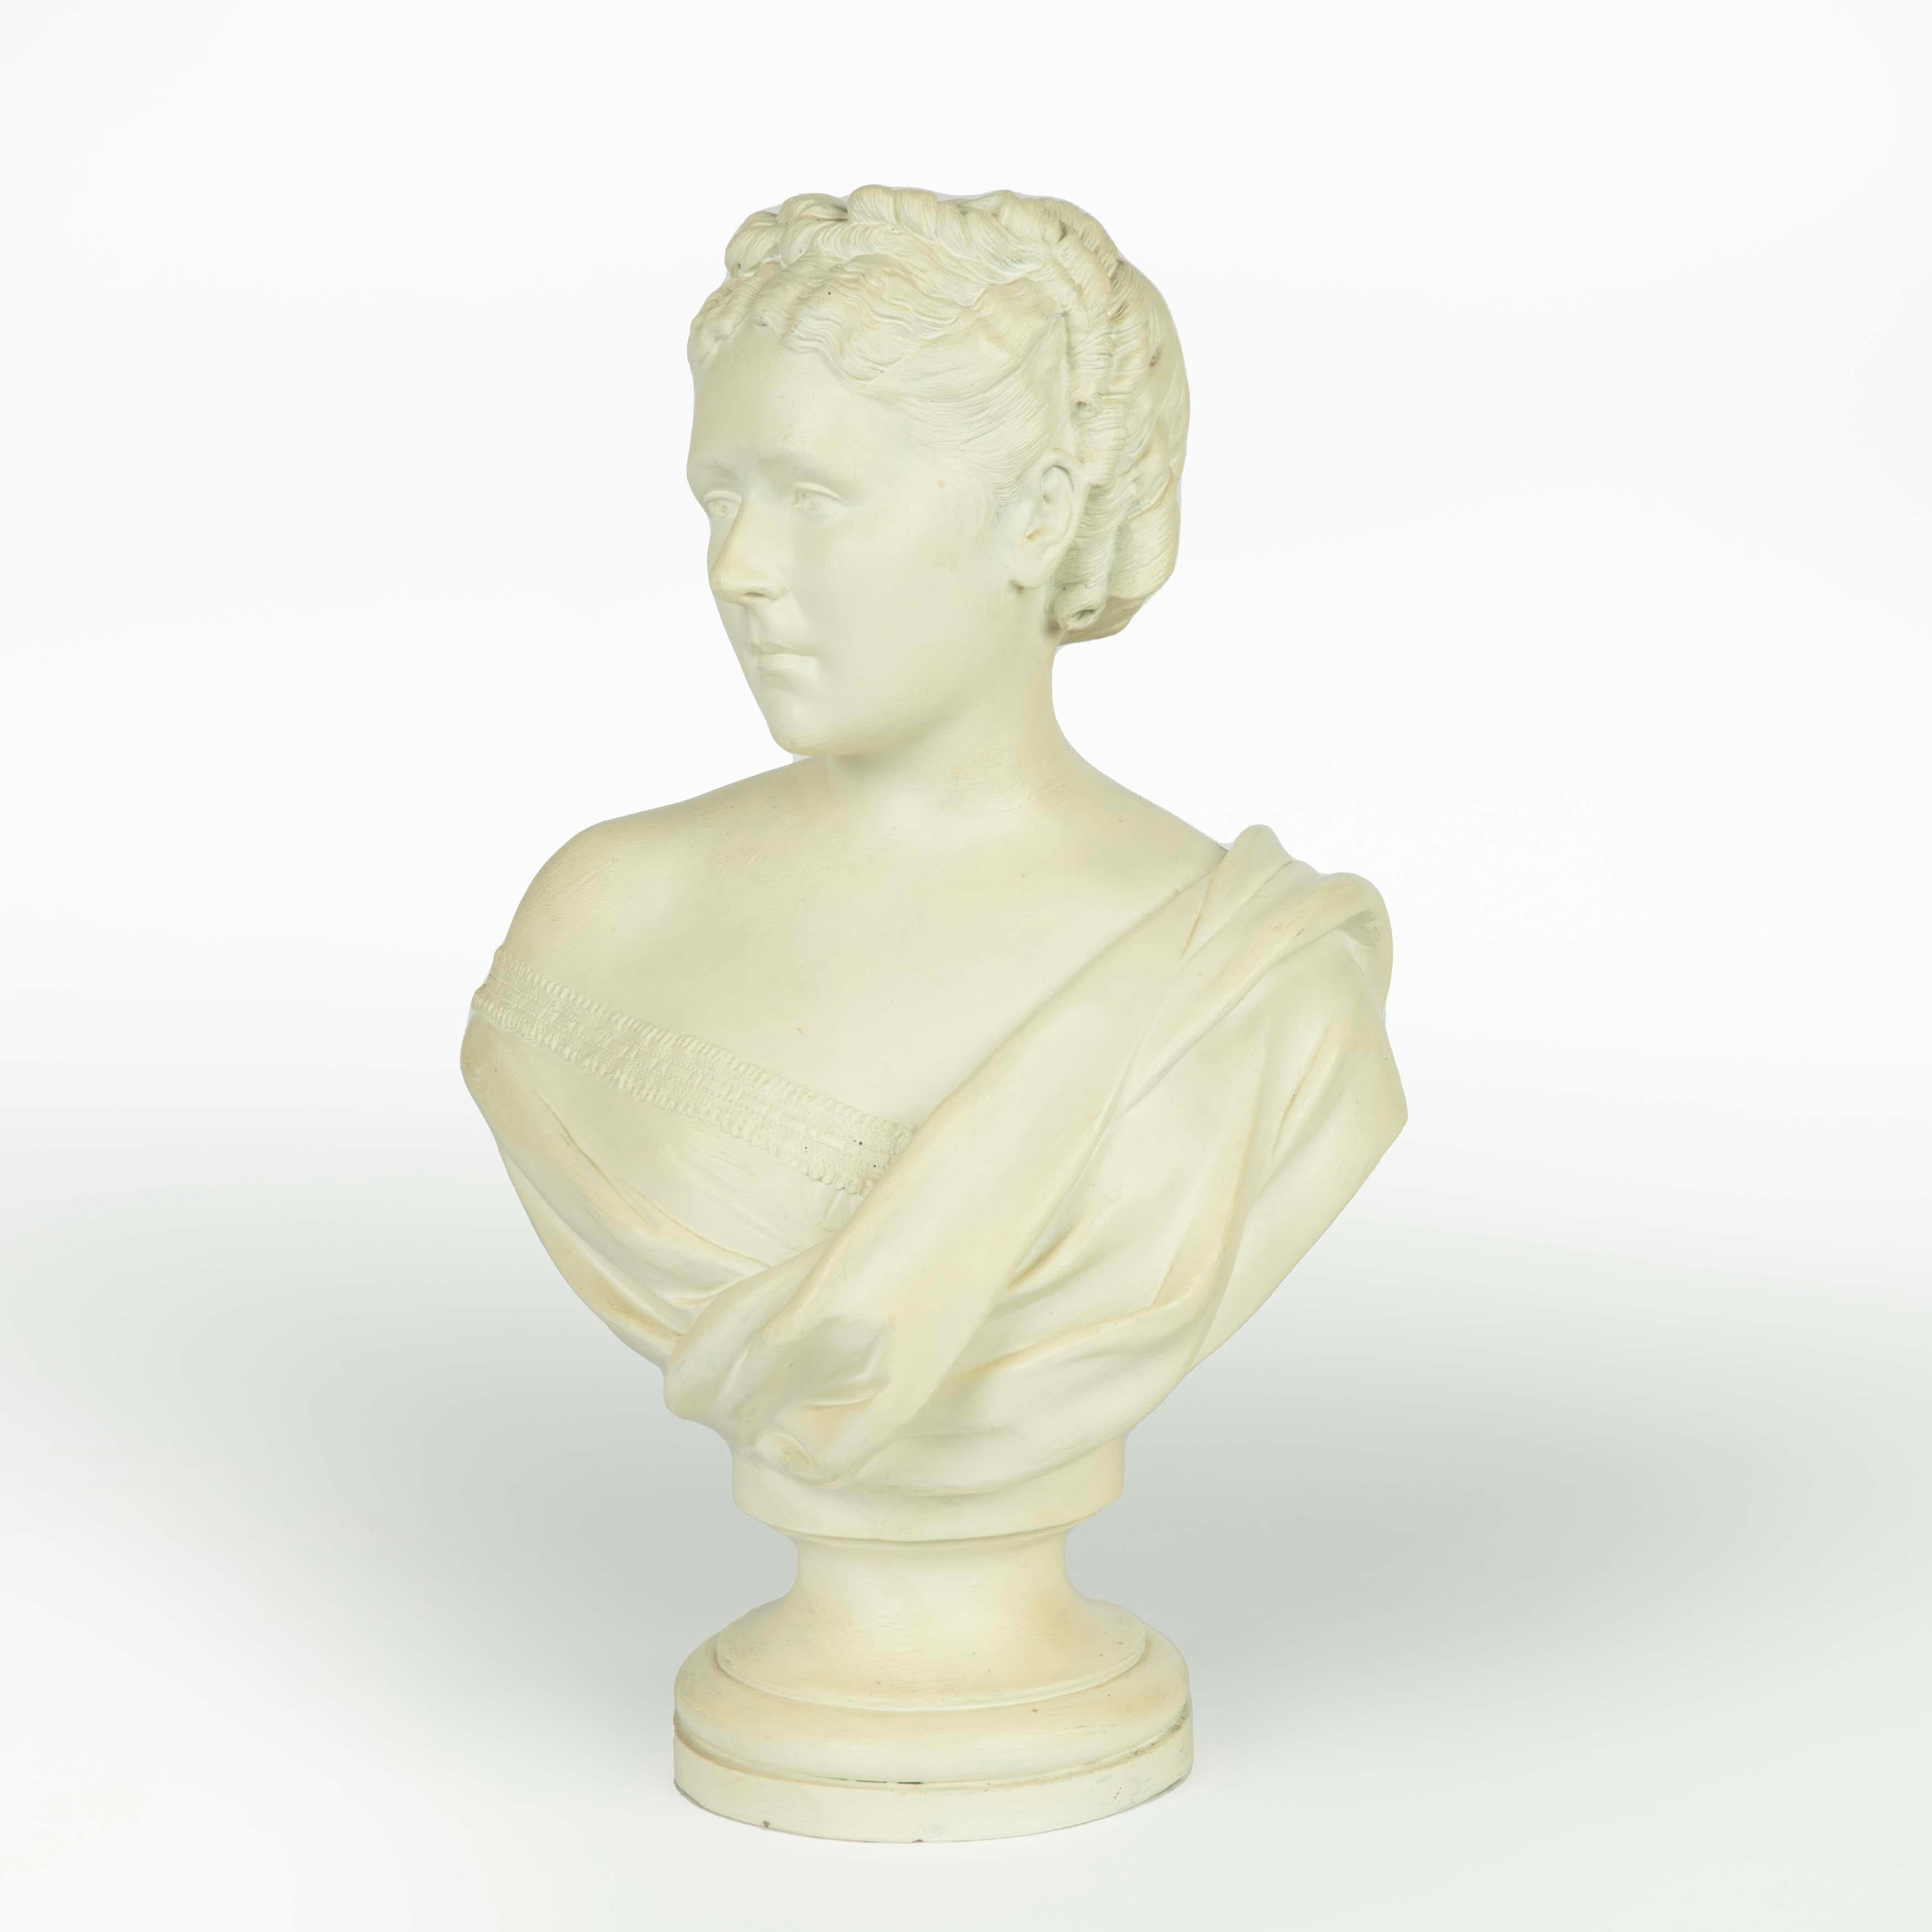 A Victorian white painted terracotta bust of a young woman, wearing a draped shawl over a bodice with a lace trim, her hair elaborately coiffed with a broad plait and multiple ringlets. English, circa 1860.